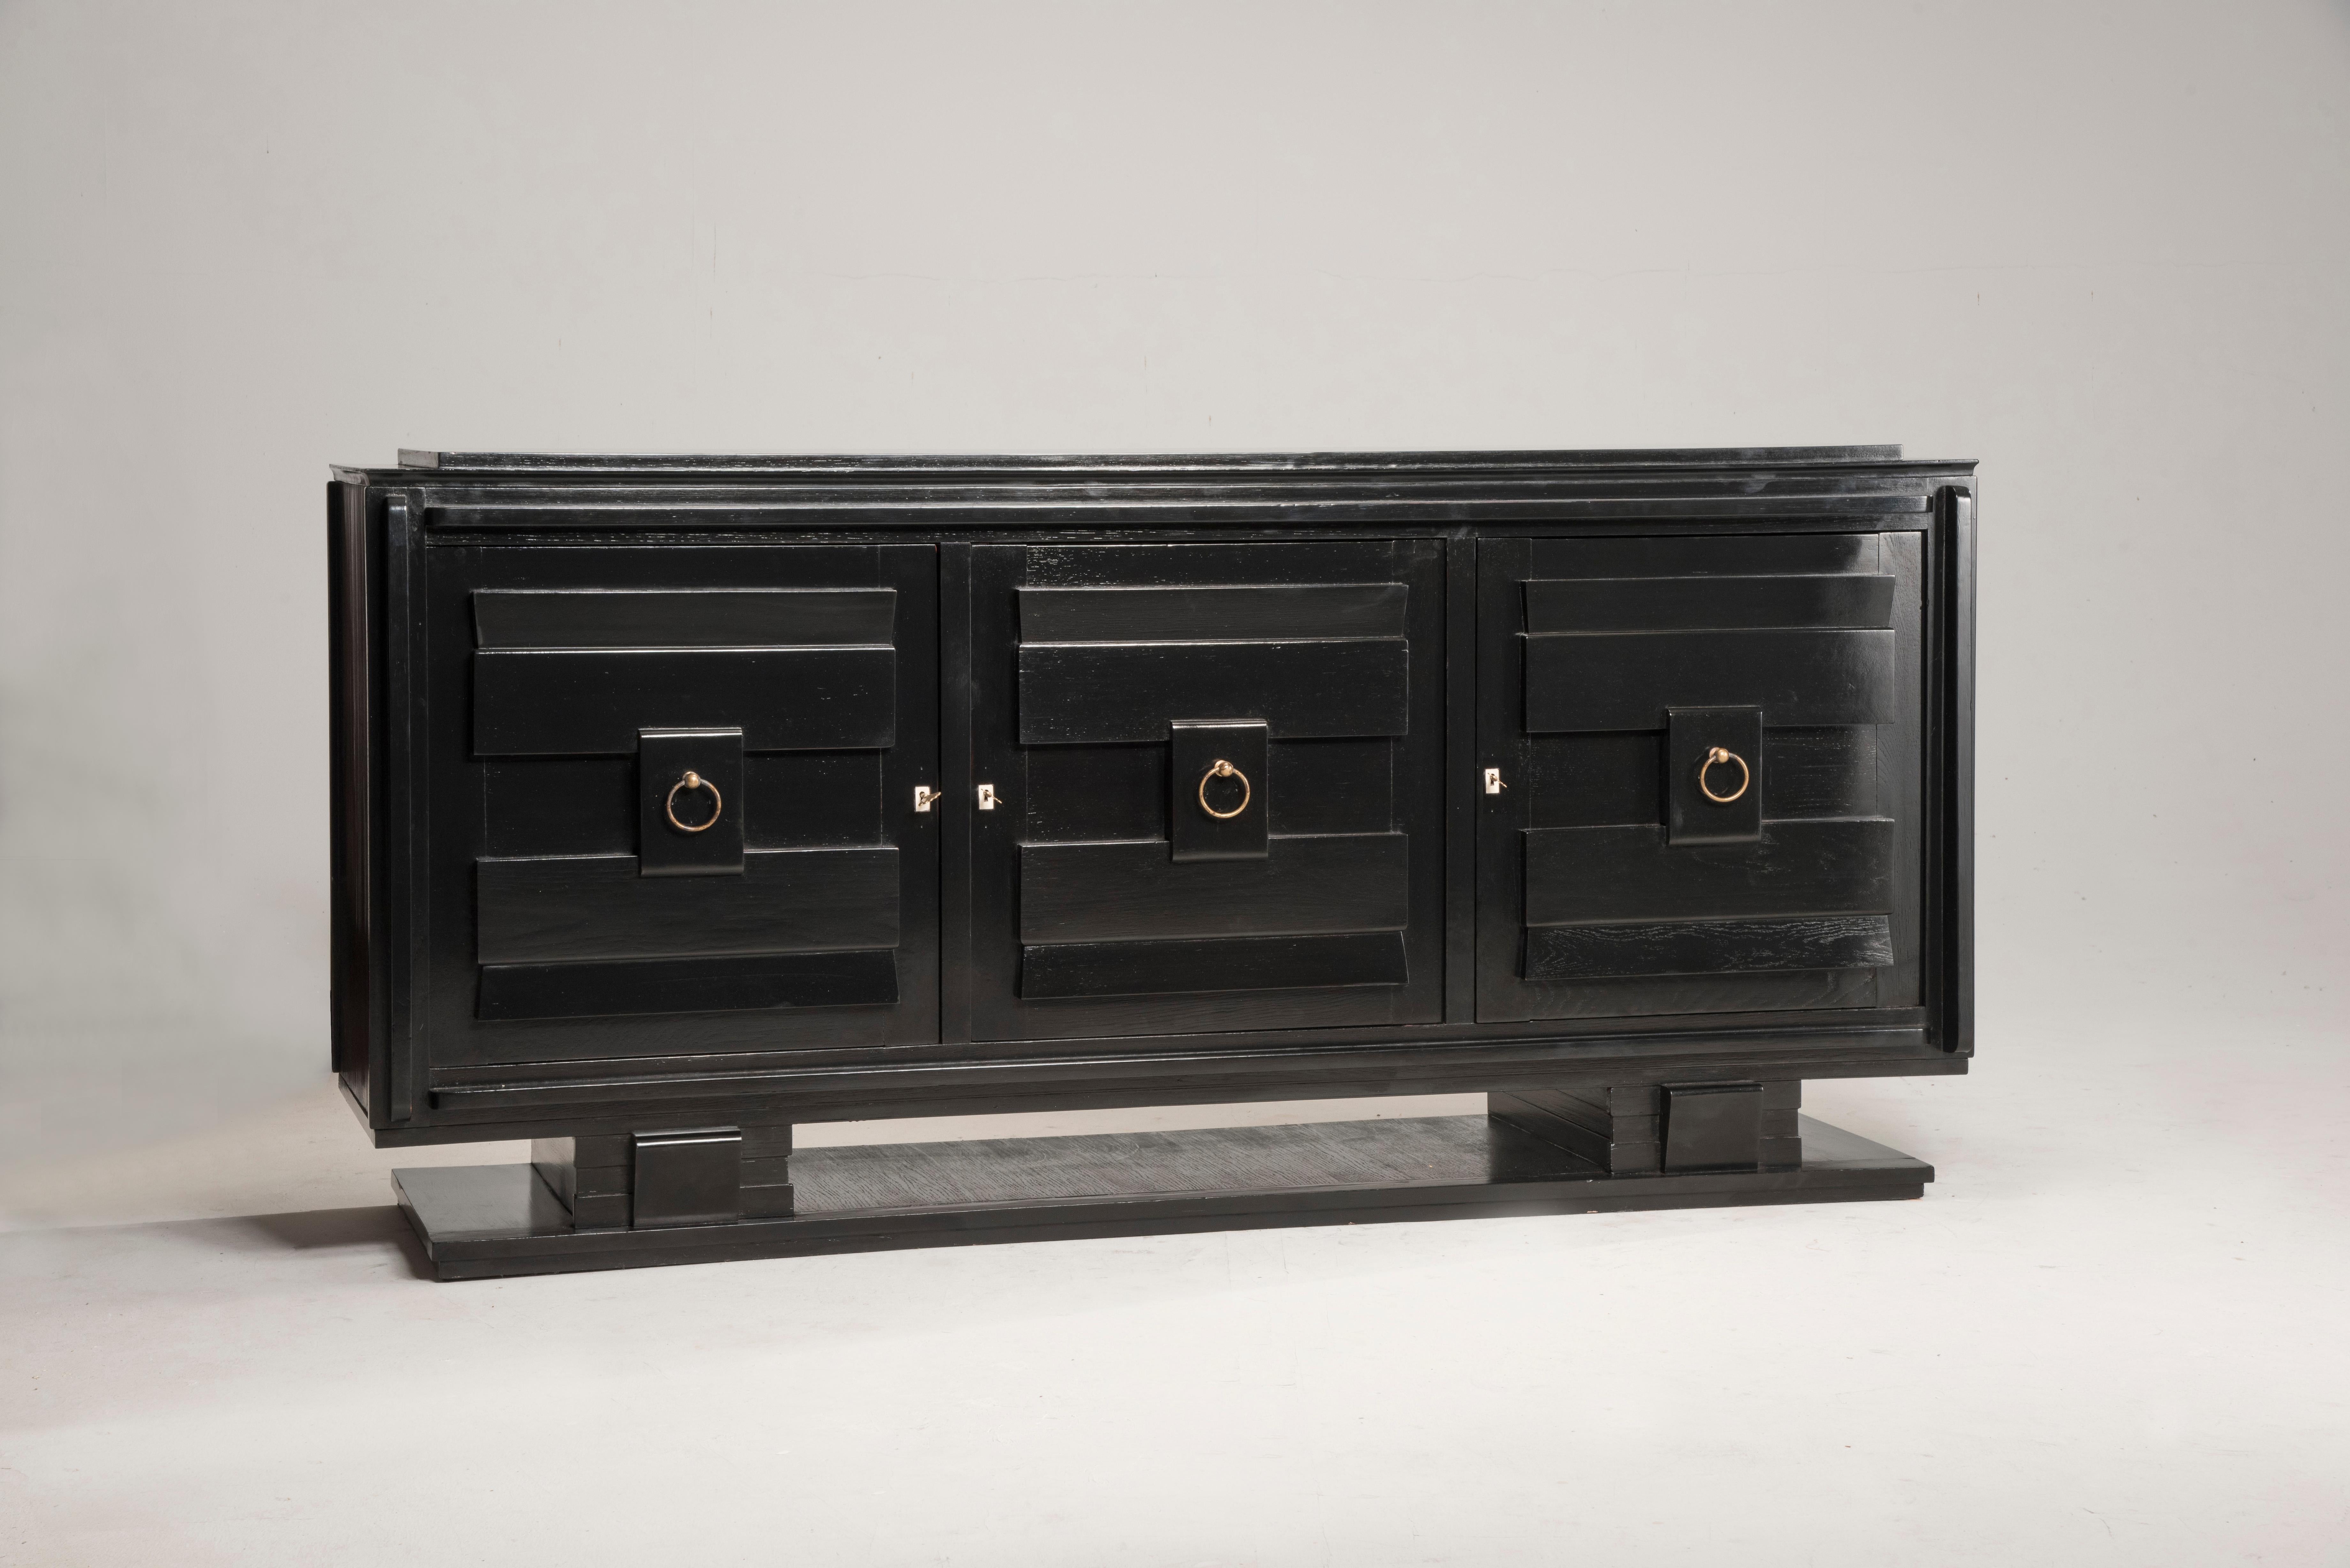 French 1940s Art Deco style black lacquered and crystal top credenza

French Art Deco sideboard. Black lacquer and crystal top. Three doors and brass hardware. Internally the doors are arranged with shelves and one drawer. The top is covered with